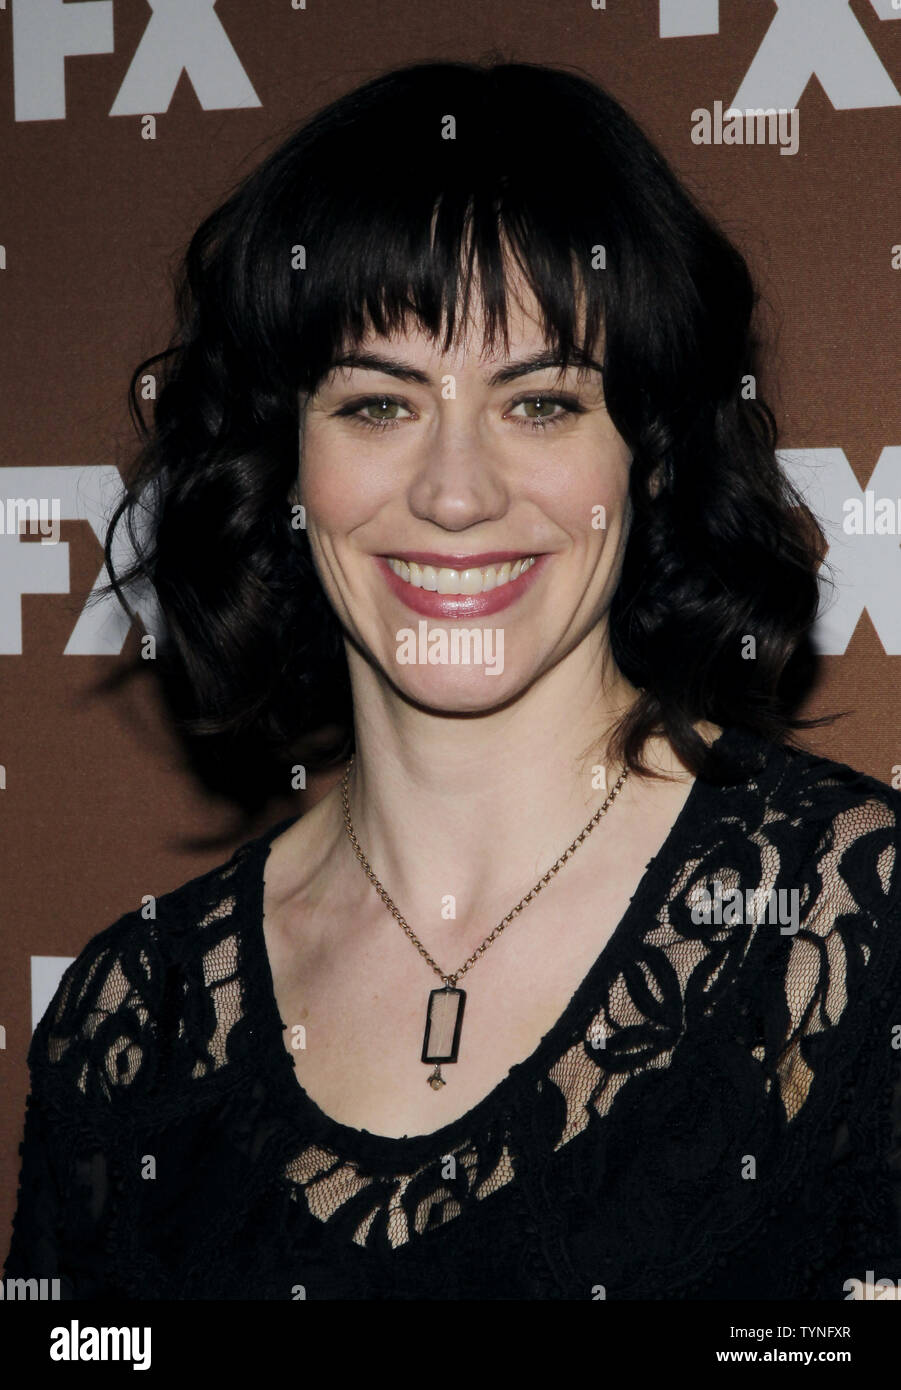 Maggie Siff arrives on the red carpet at the 2013 FX Upfronts at Lucky Strike Lanes in New York City on March 28, 2013.       UPI/John Angelillo Stock Photo